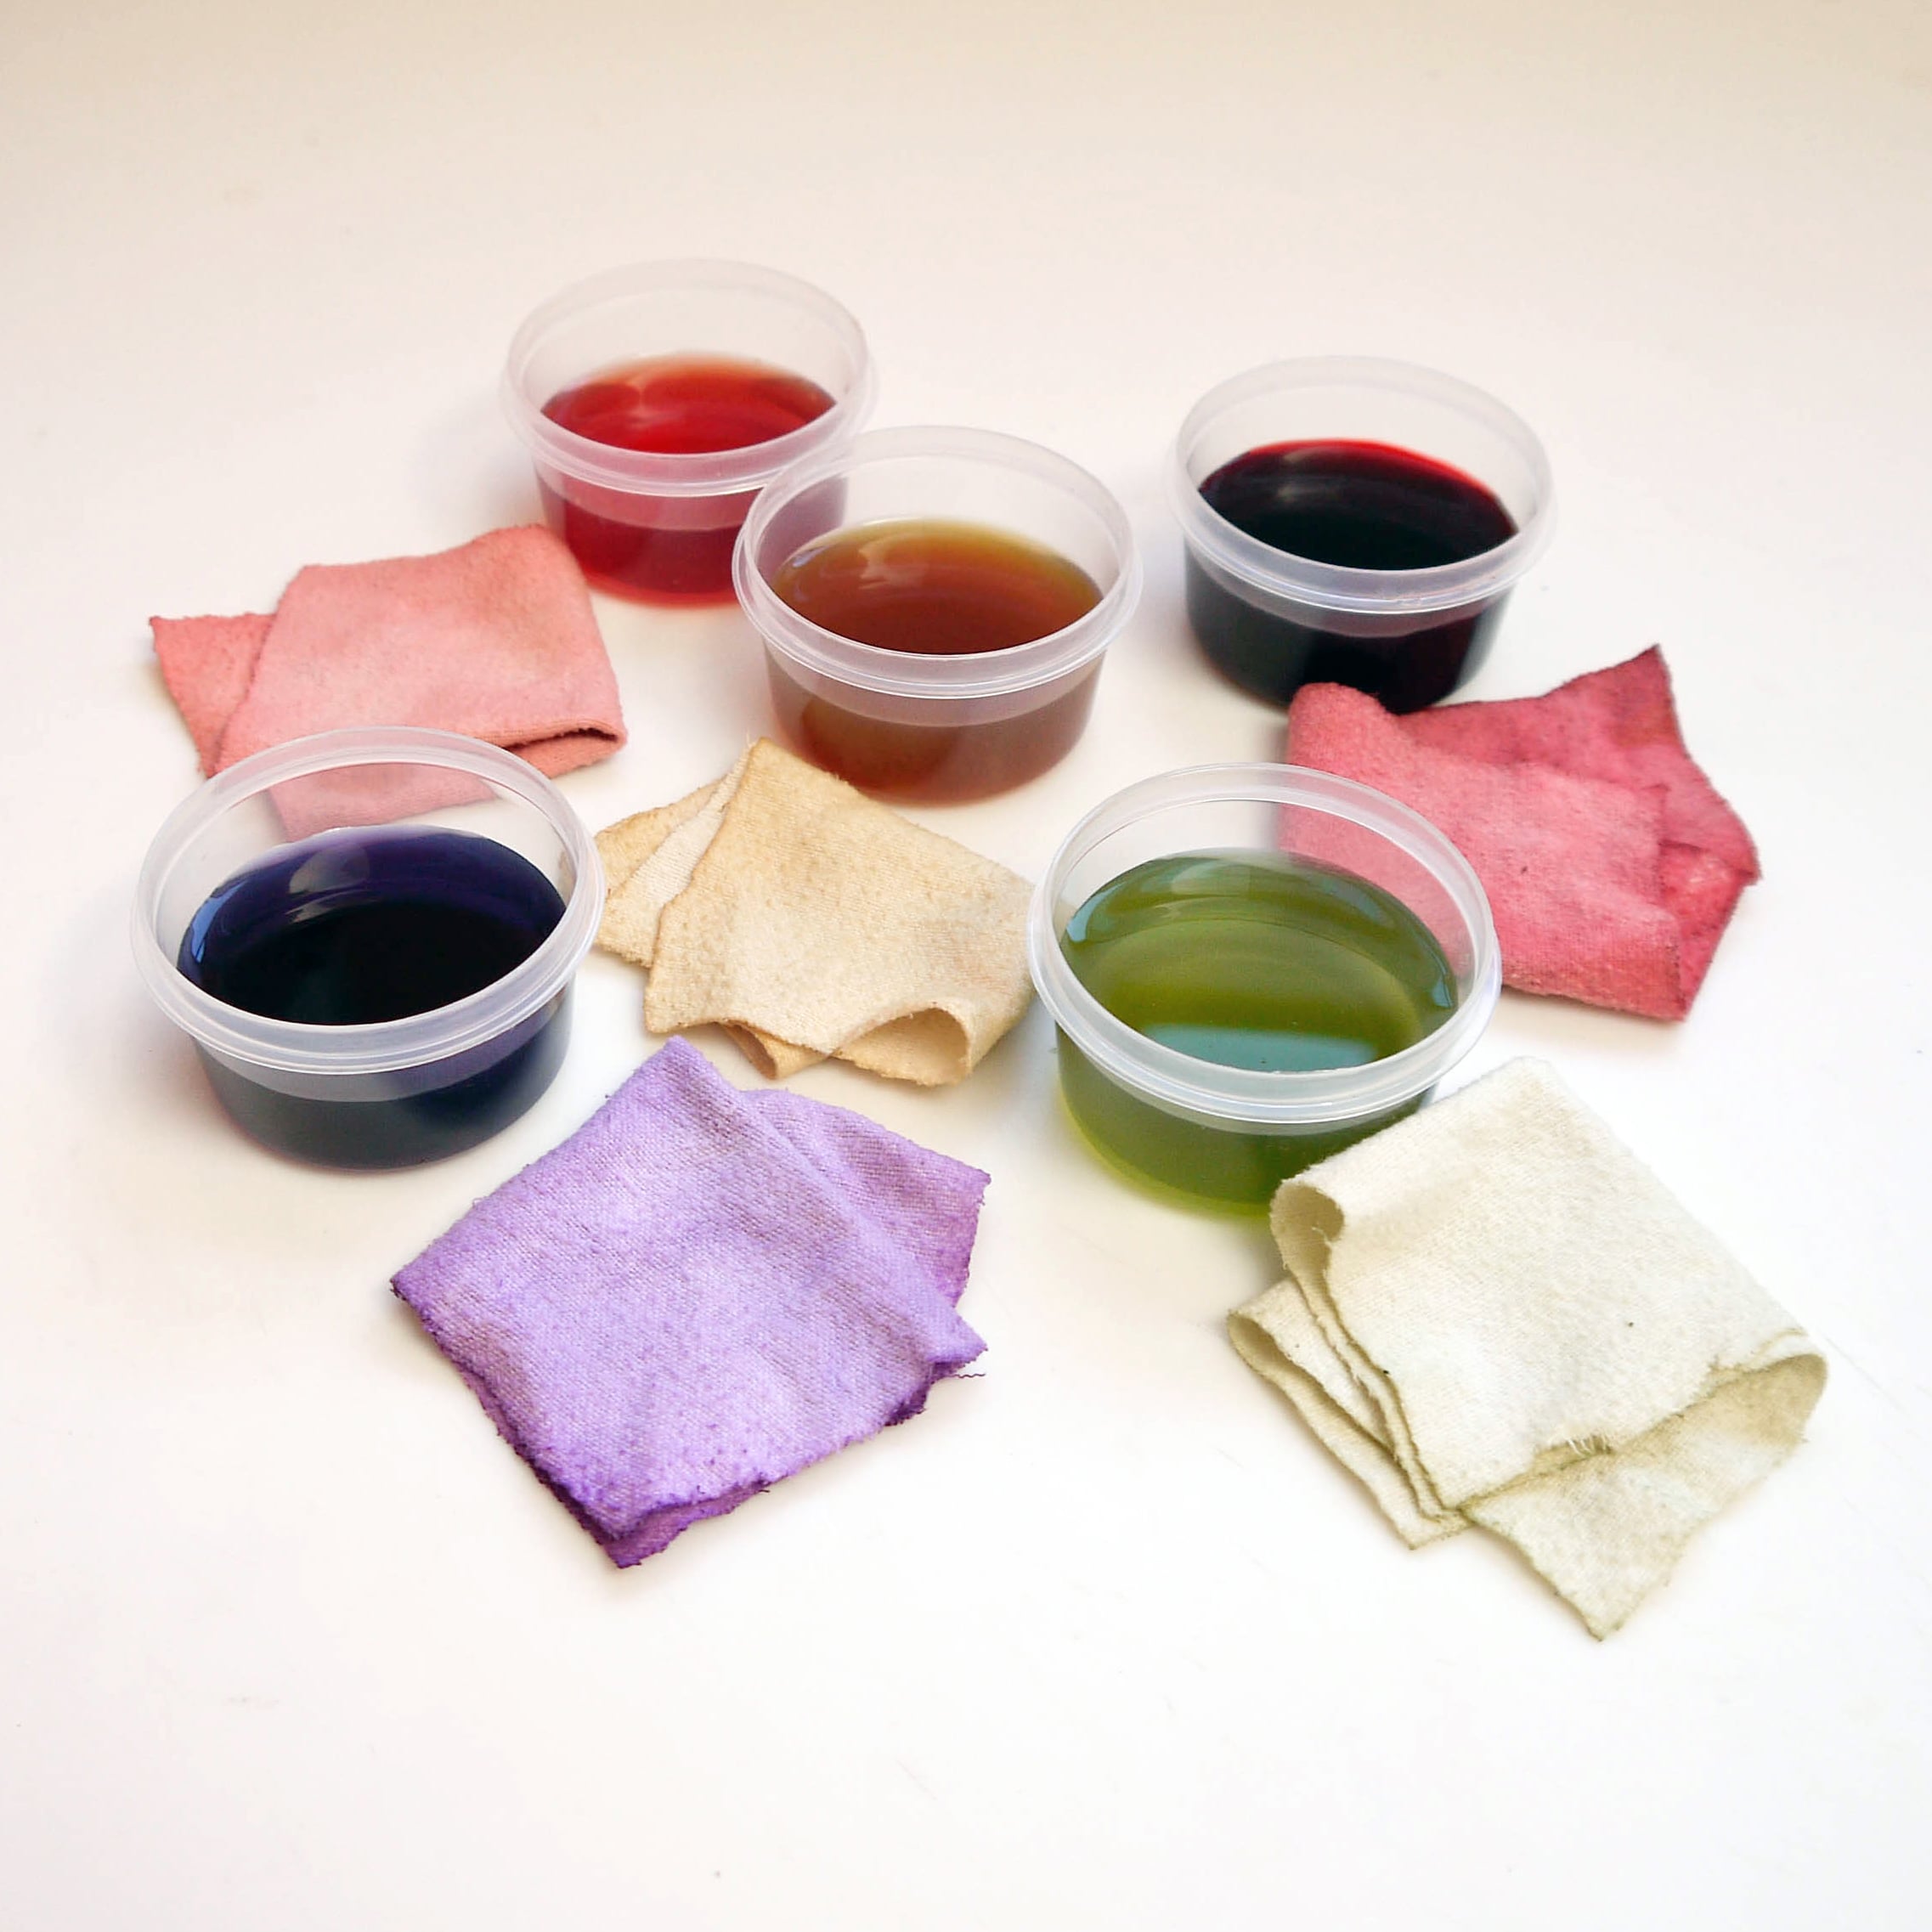 Dye a Shirt With Veggies and Fruits